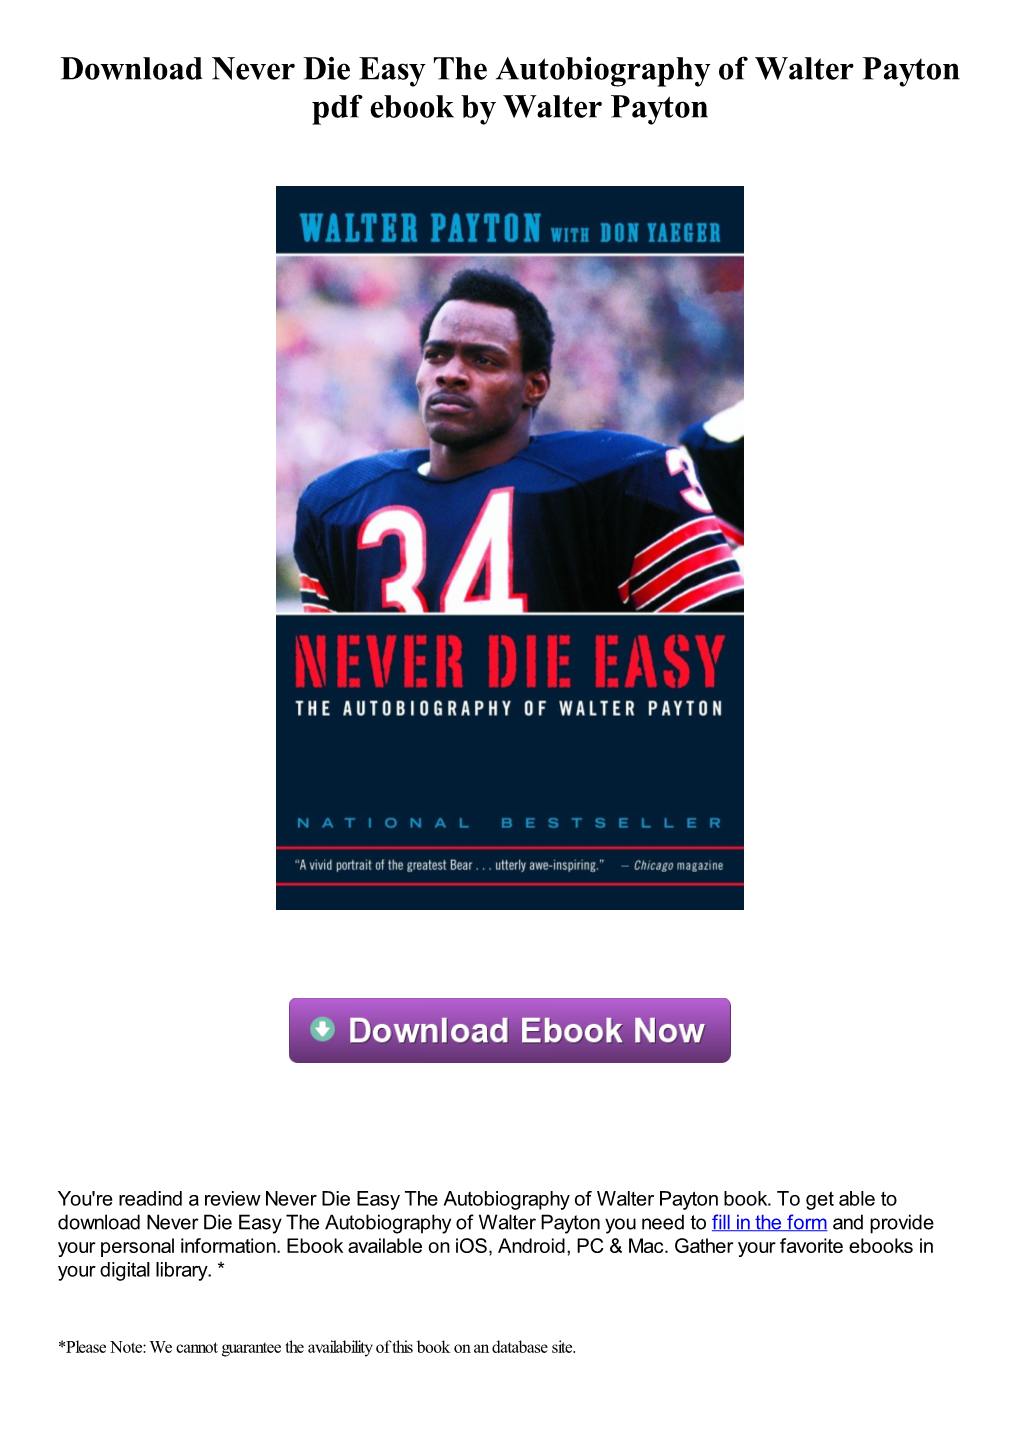 Never Die Easy the Autobiography of Walter Payton Pdf Ebook by Walter Payton